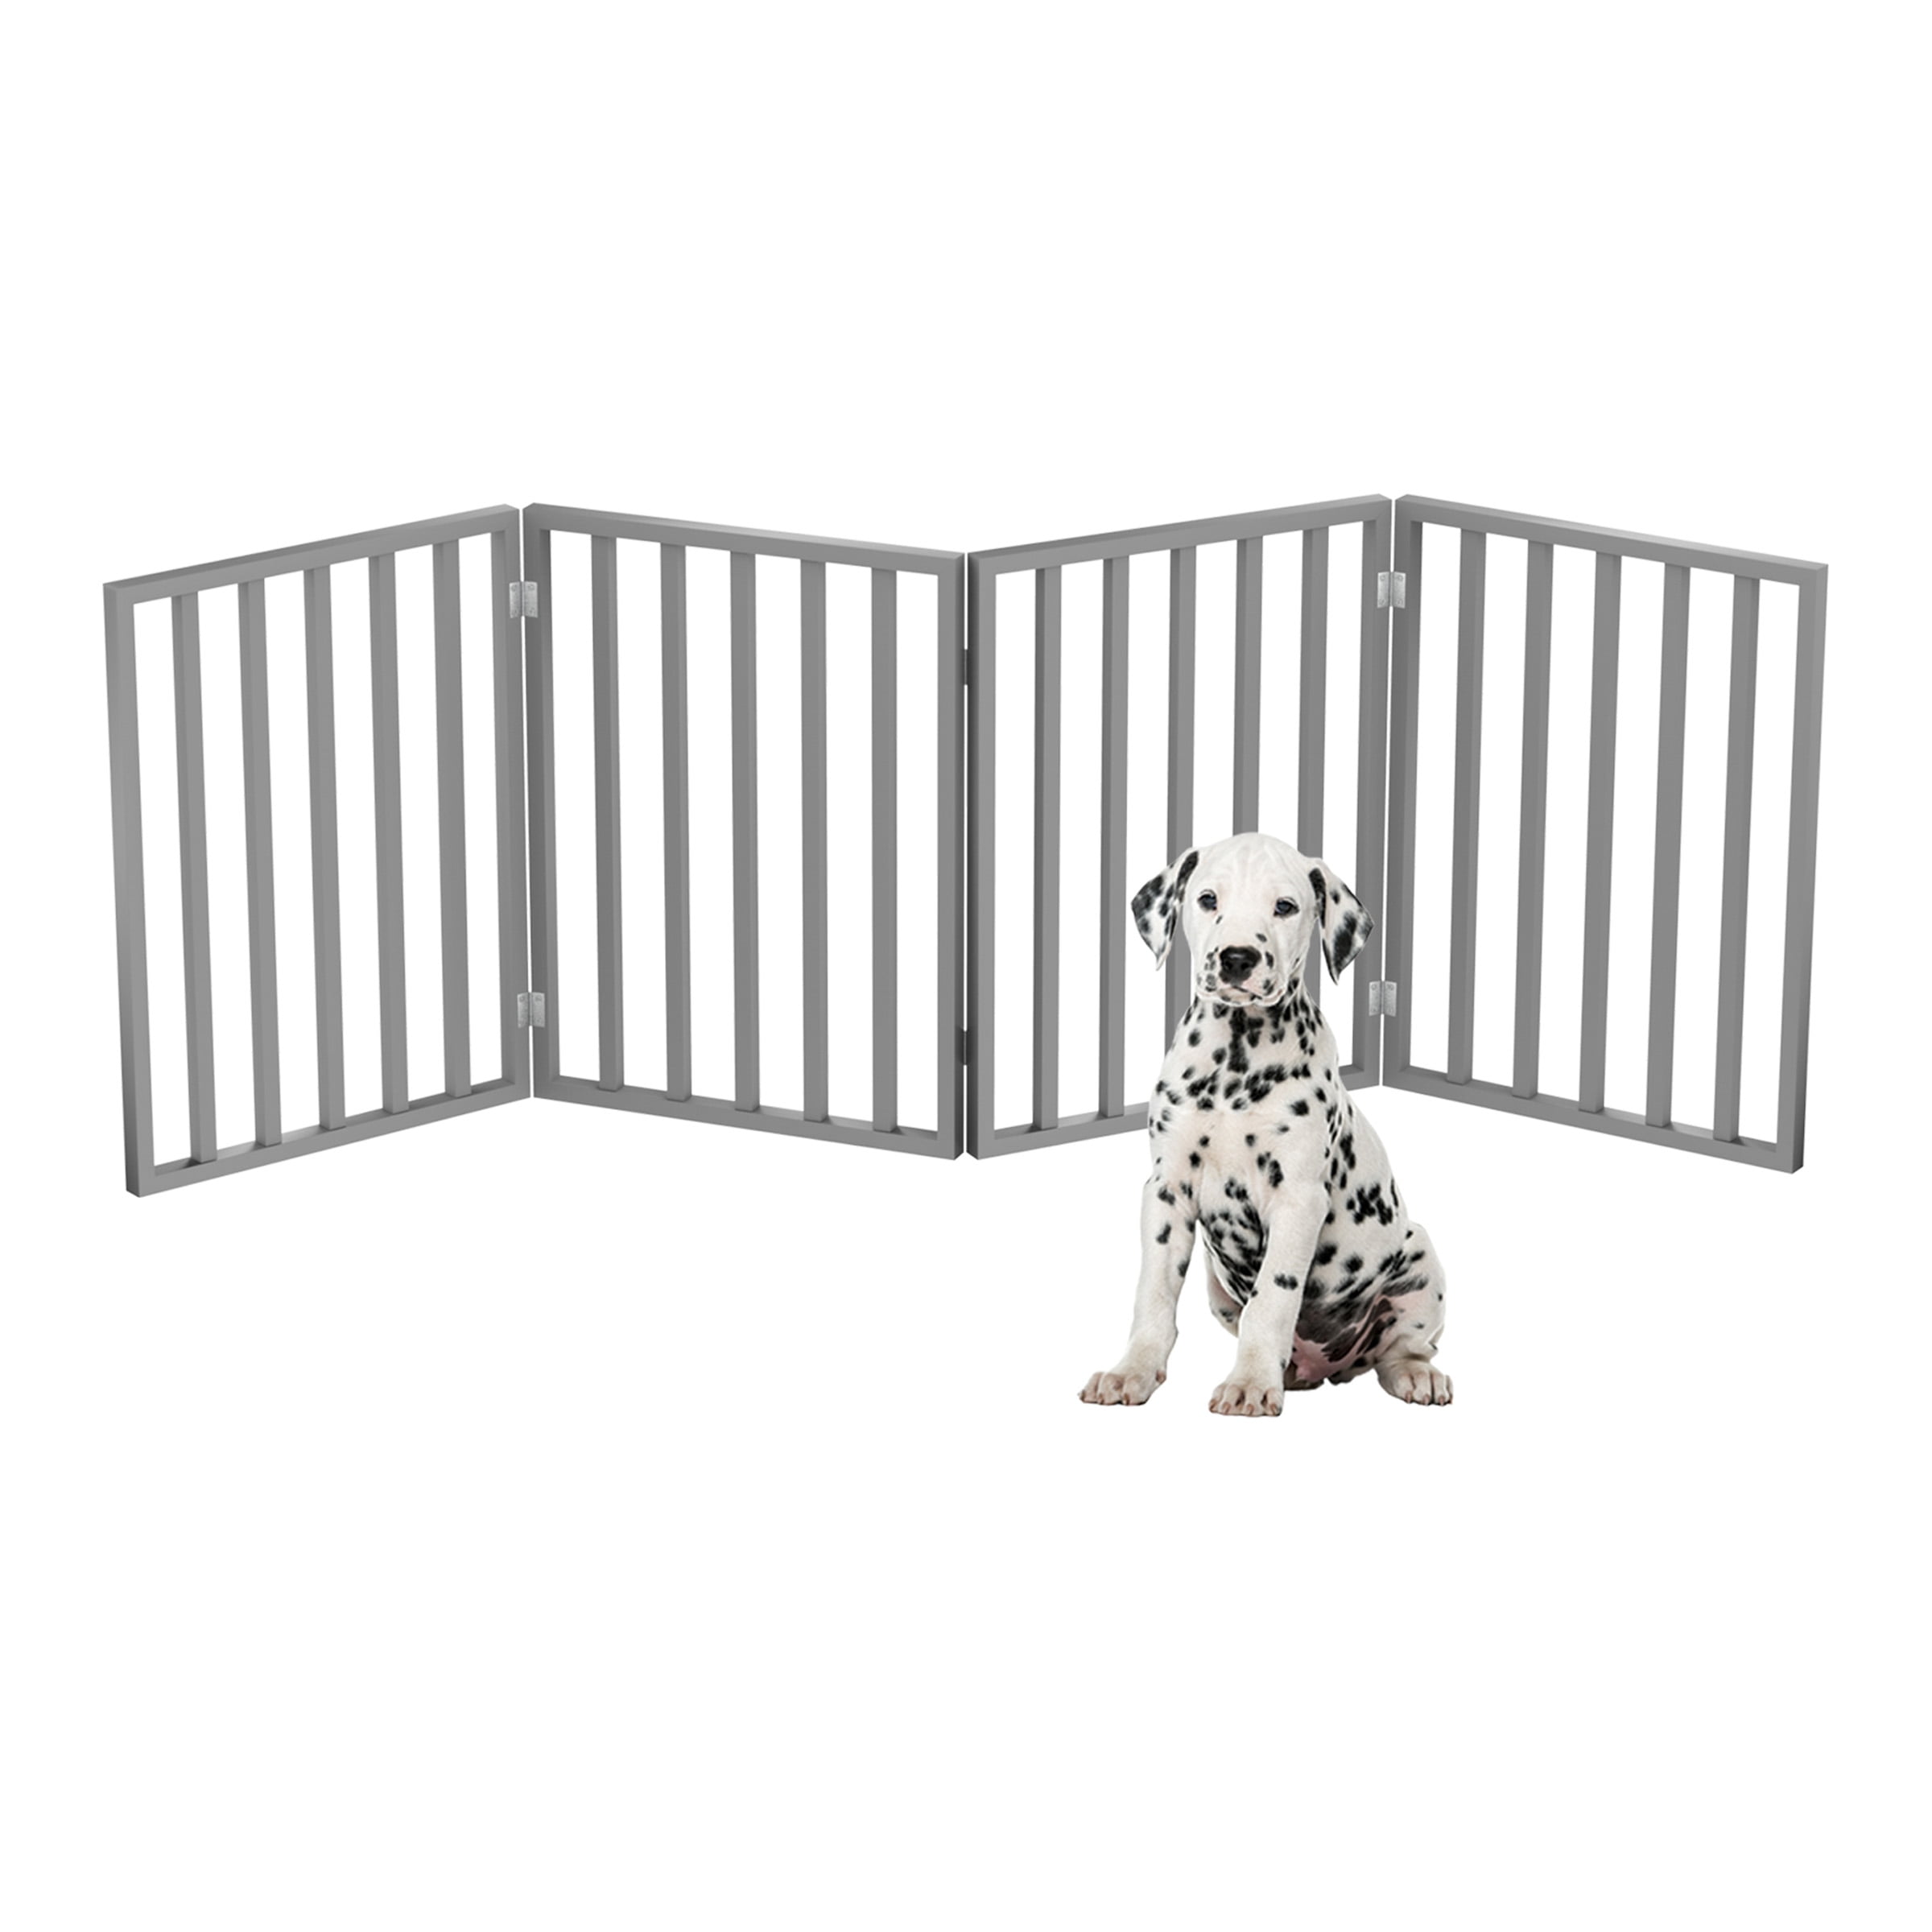 【3 Panels】 60‘’W x 24''H ZJSF Freestanding Foldable Pet Gate for Dogs,Wooden Dog Gate for The House Tall Dog Fence,Stairs,White 